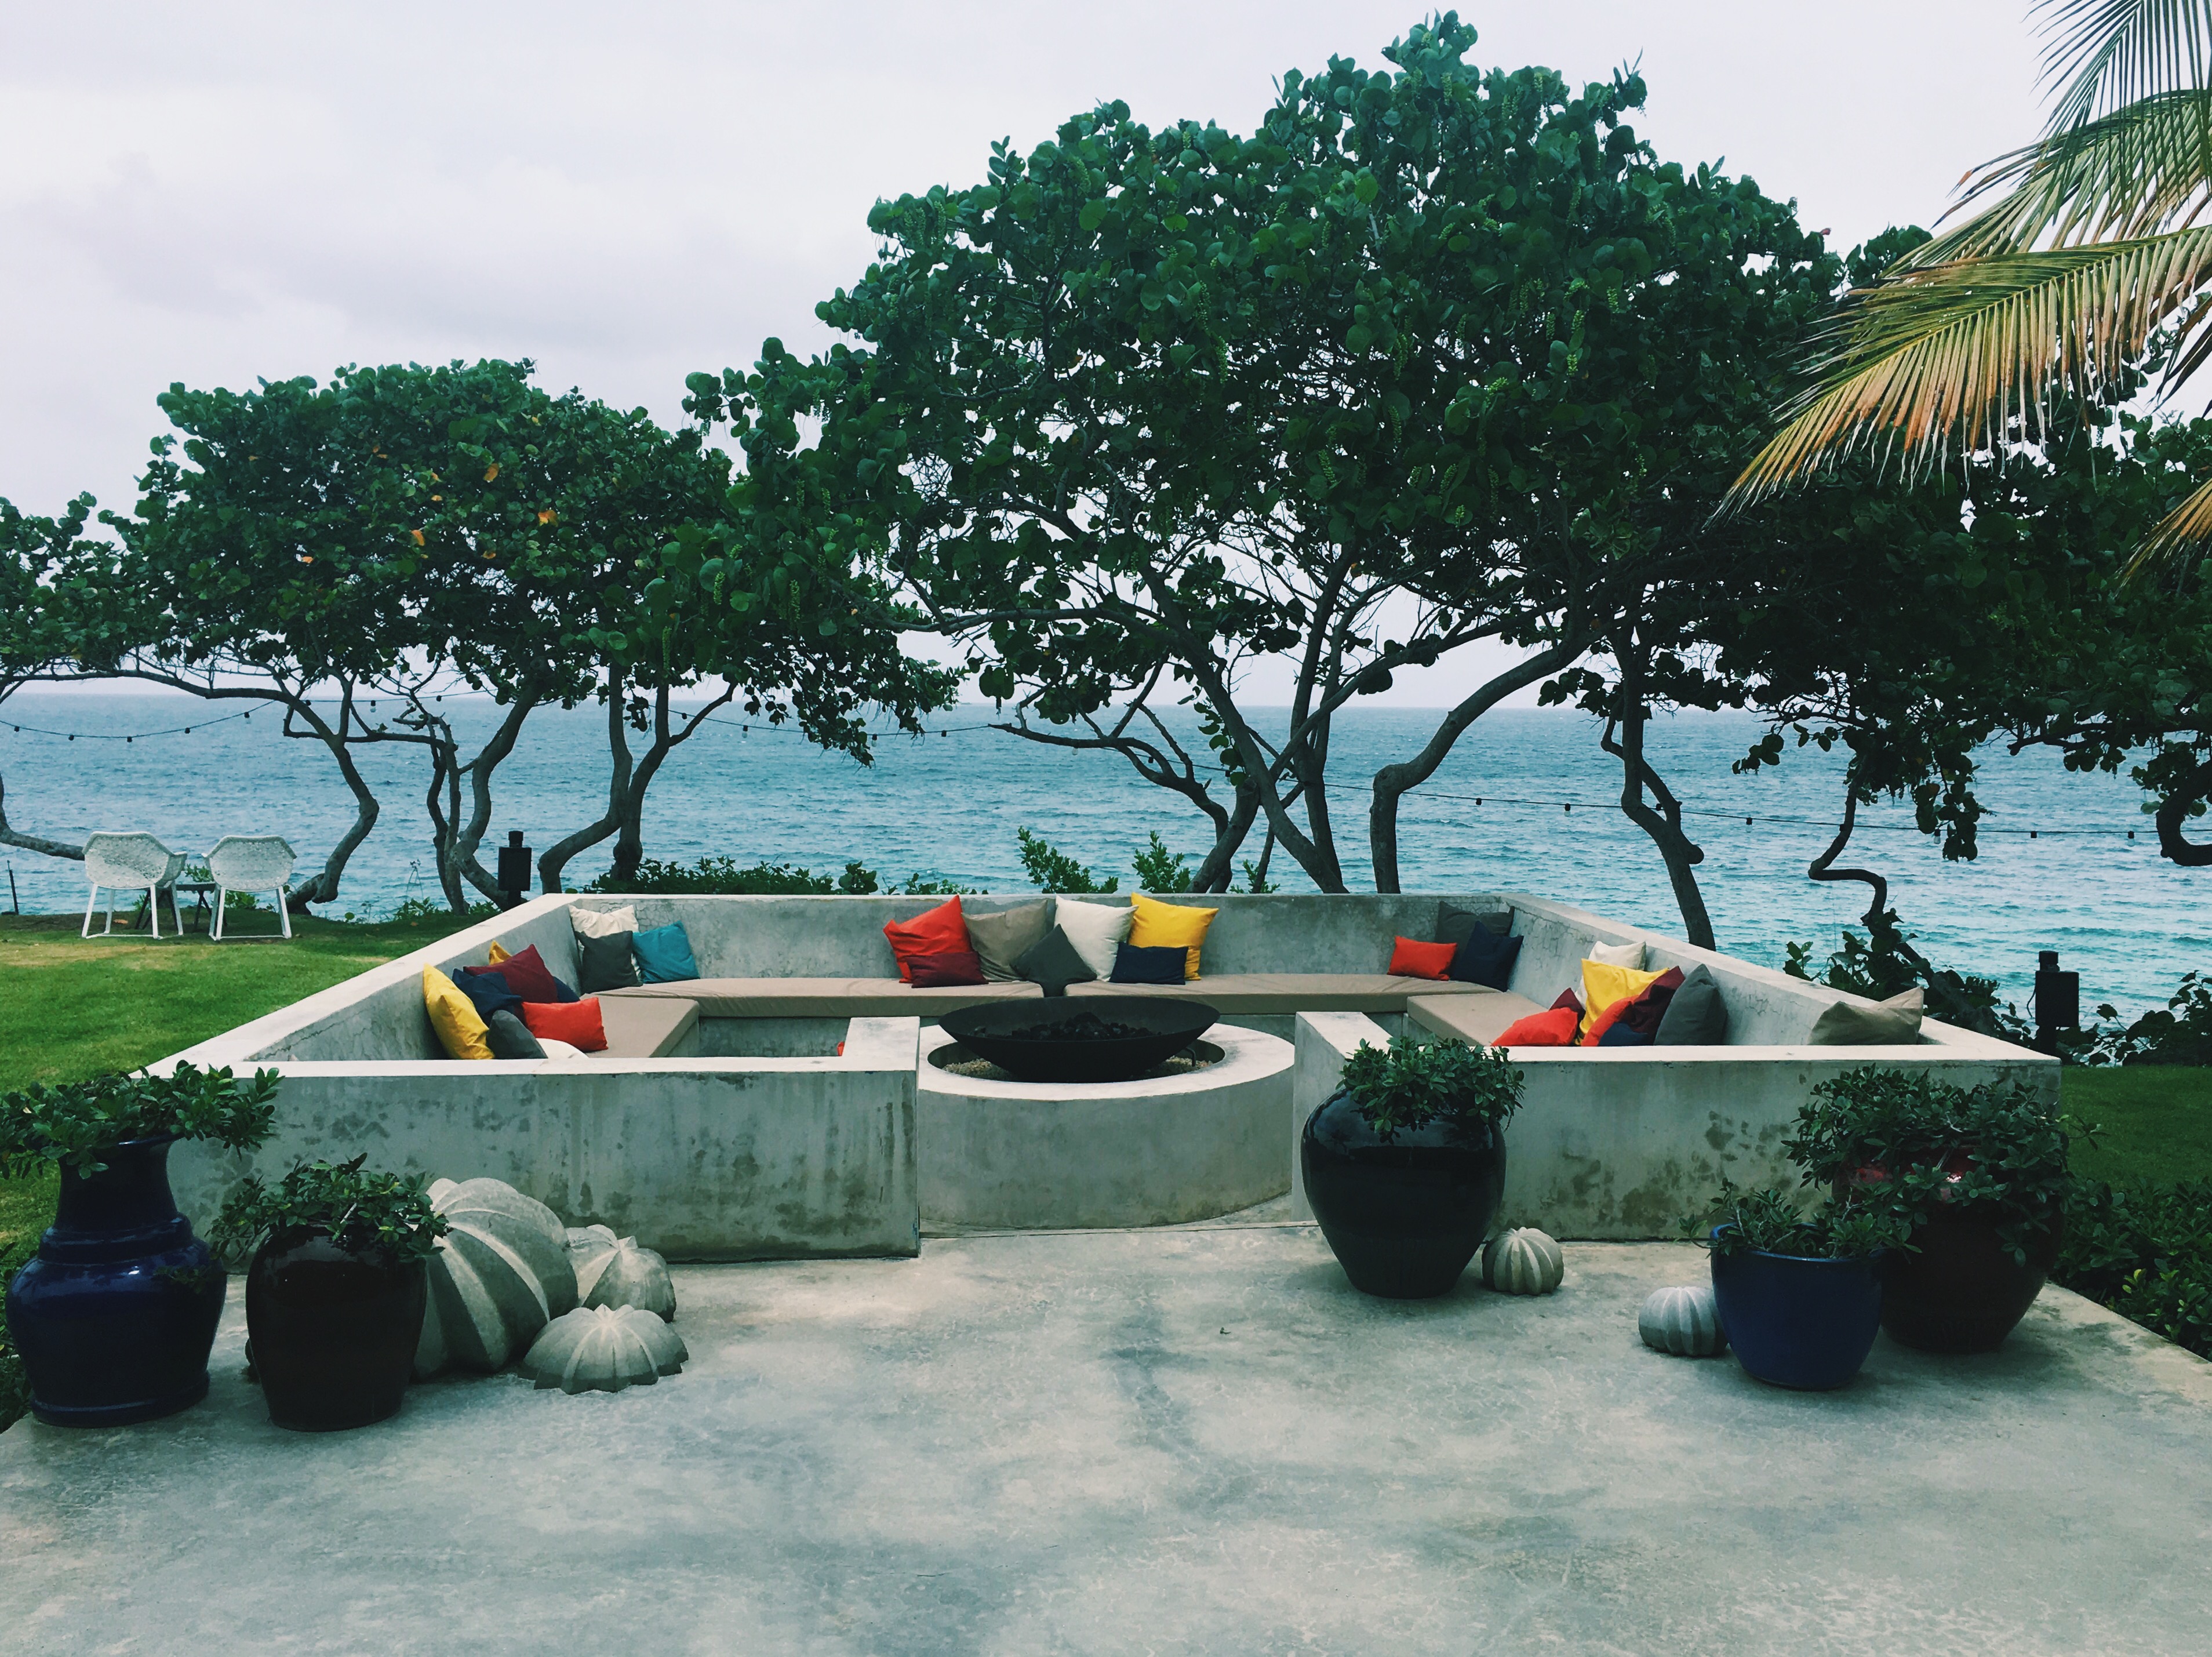 Our Fabulous Escape to the W Retreat & Spa in Vieques Island